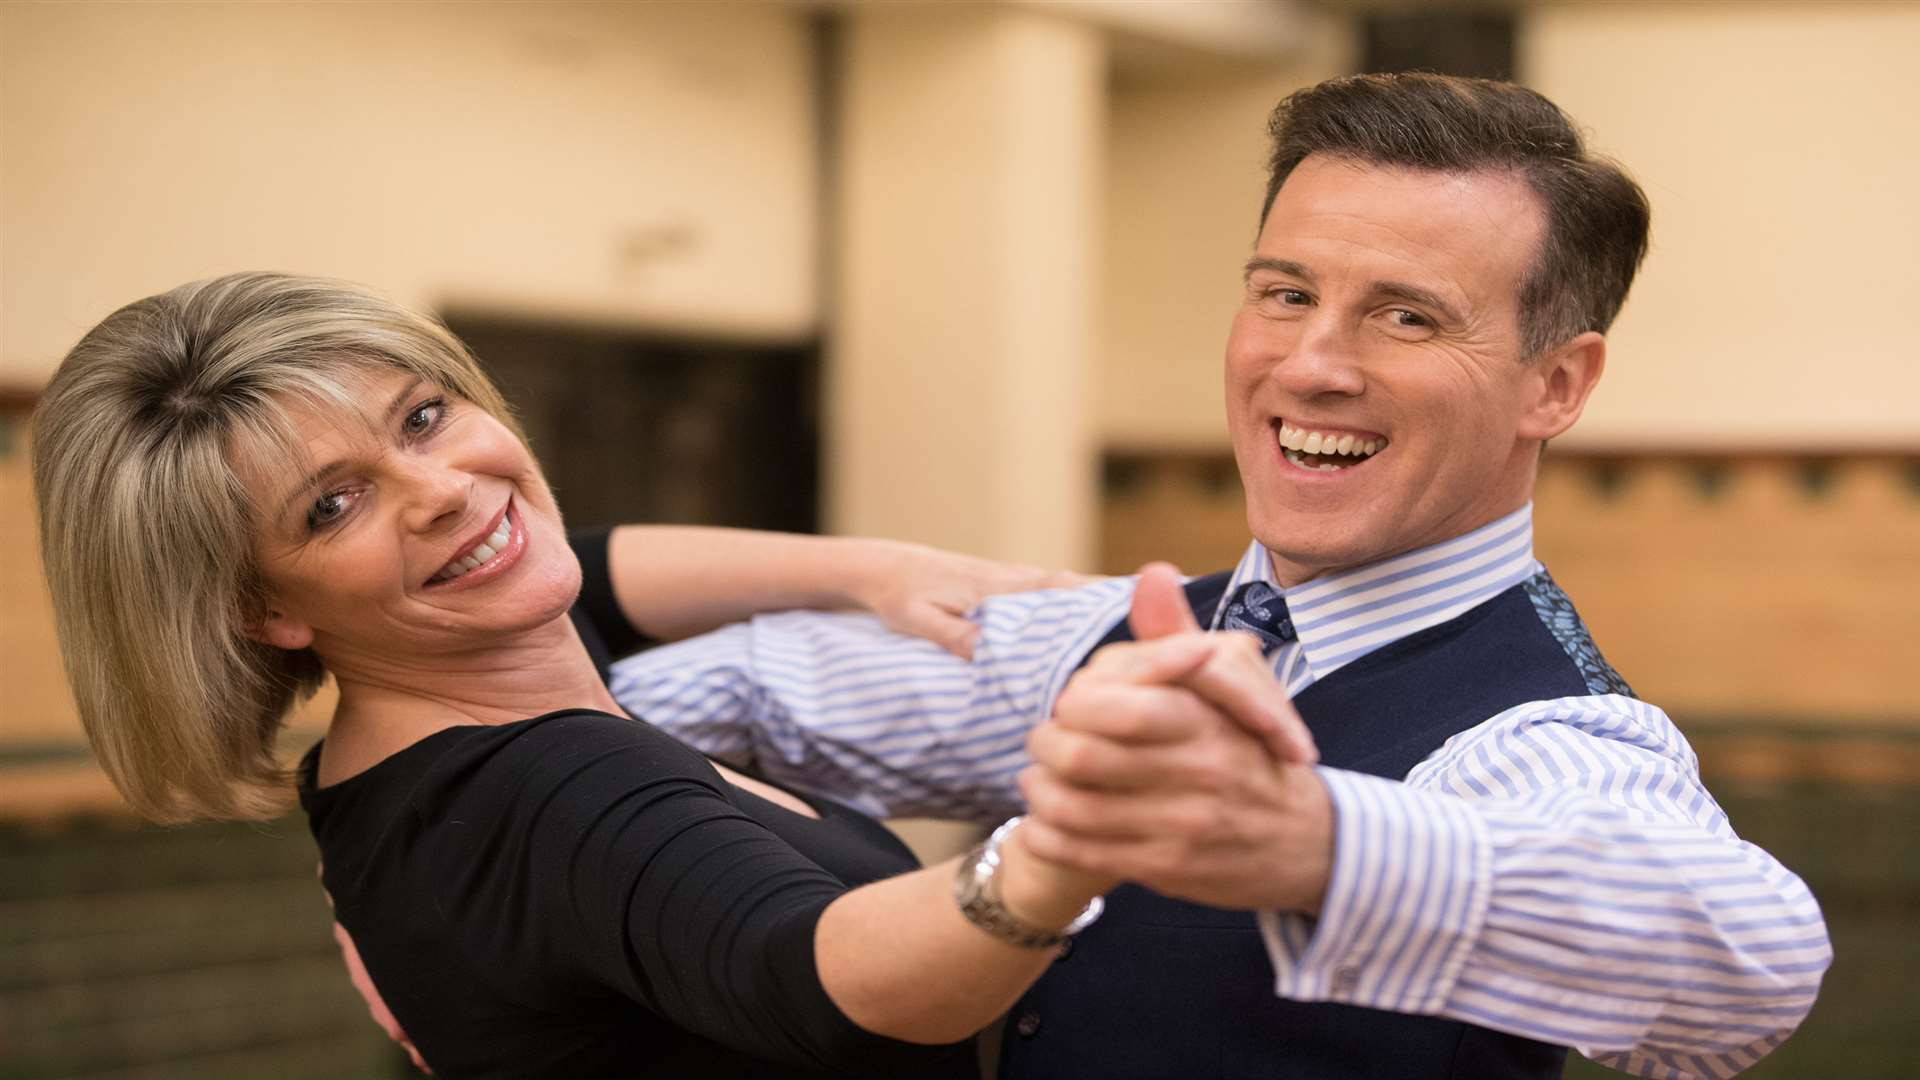 Anotn du Beke with Strictly partner Ruth Langsford in rehearsals this year Picture: Aaron Chown/PA Photos